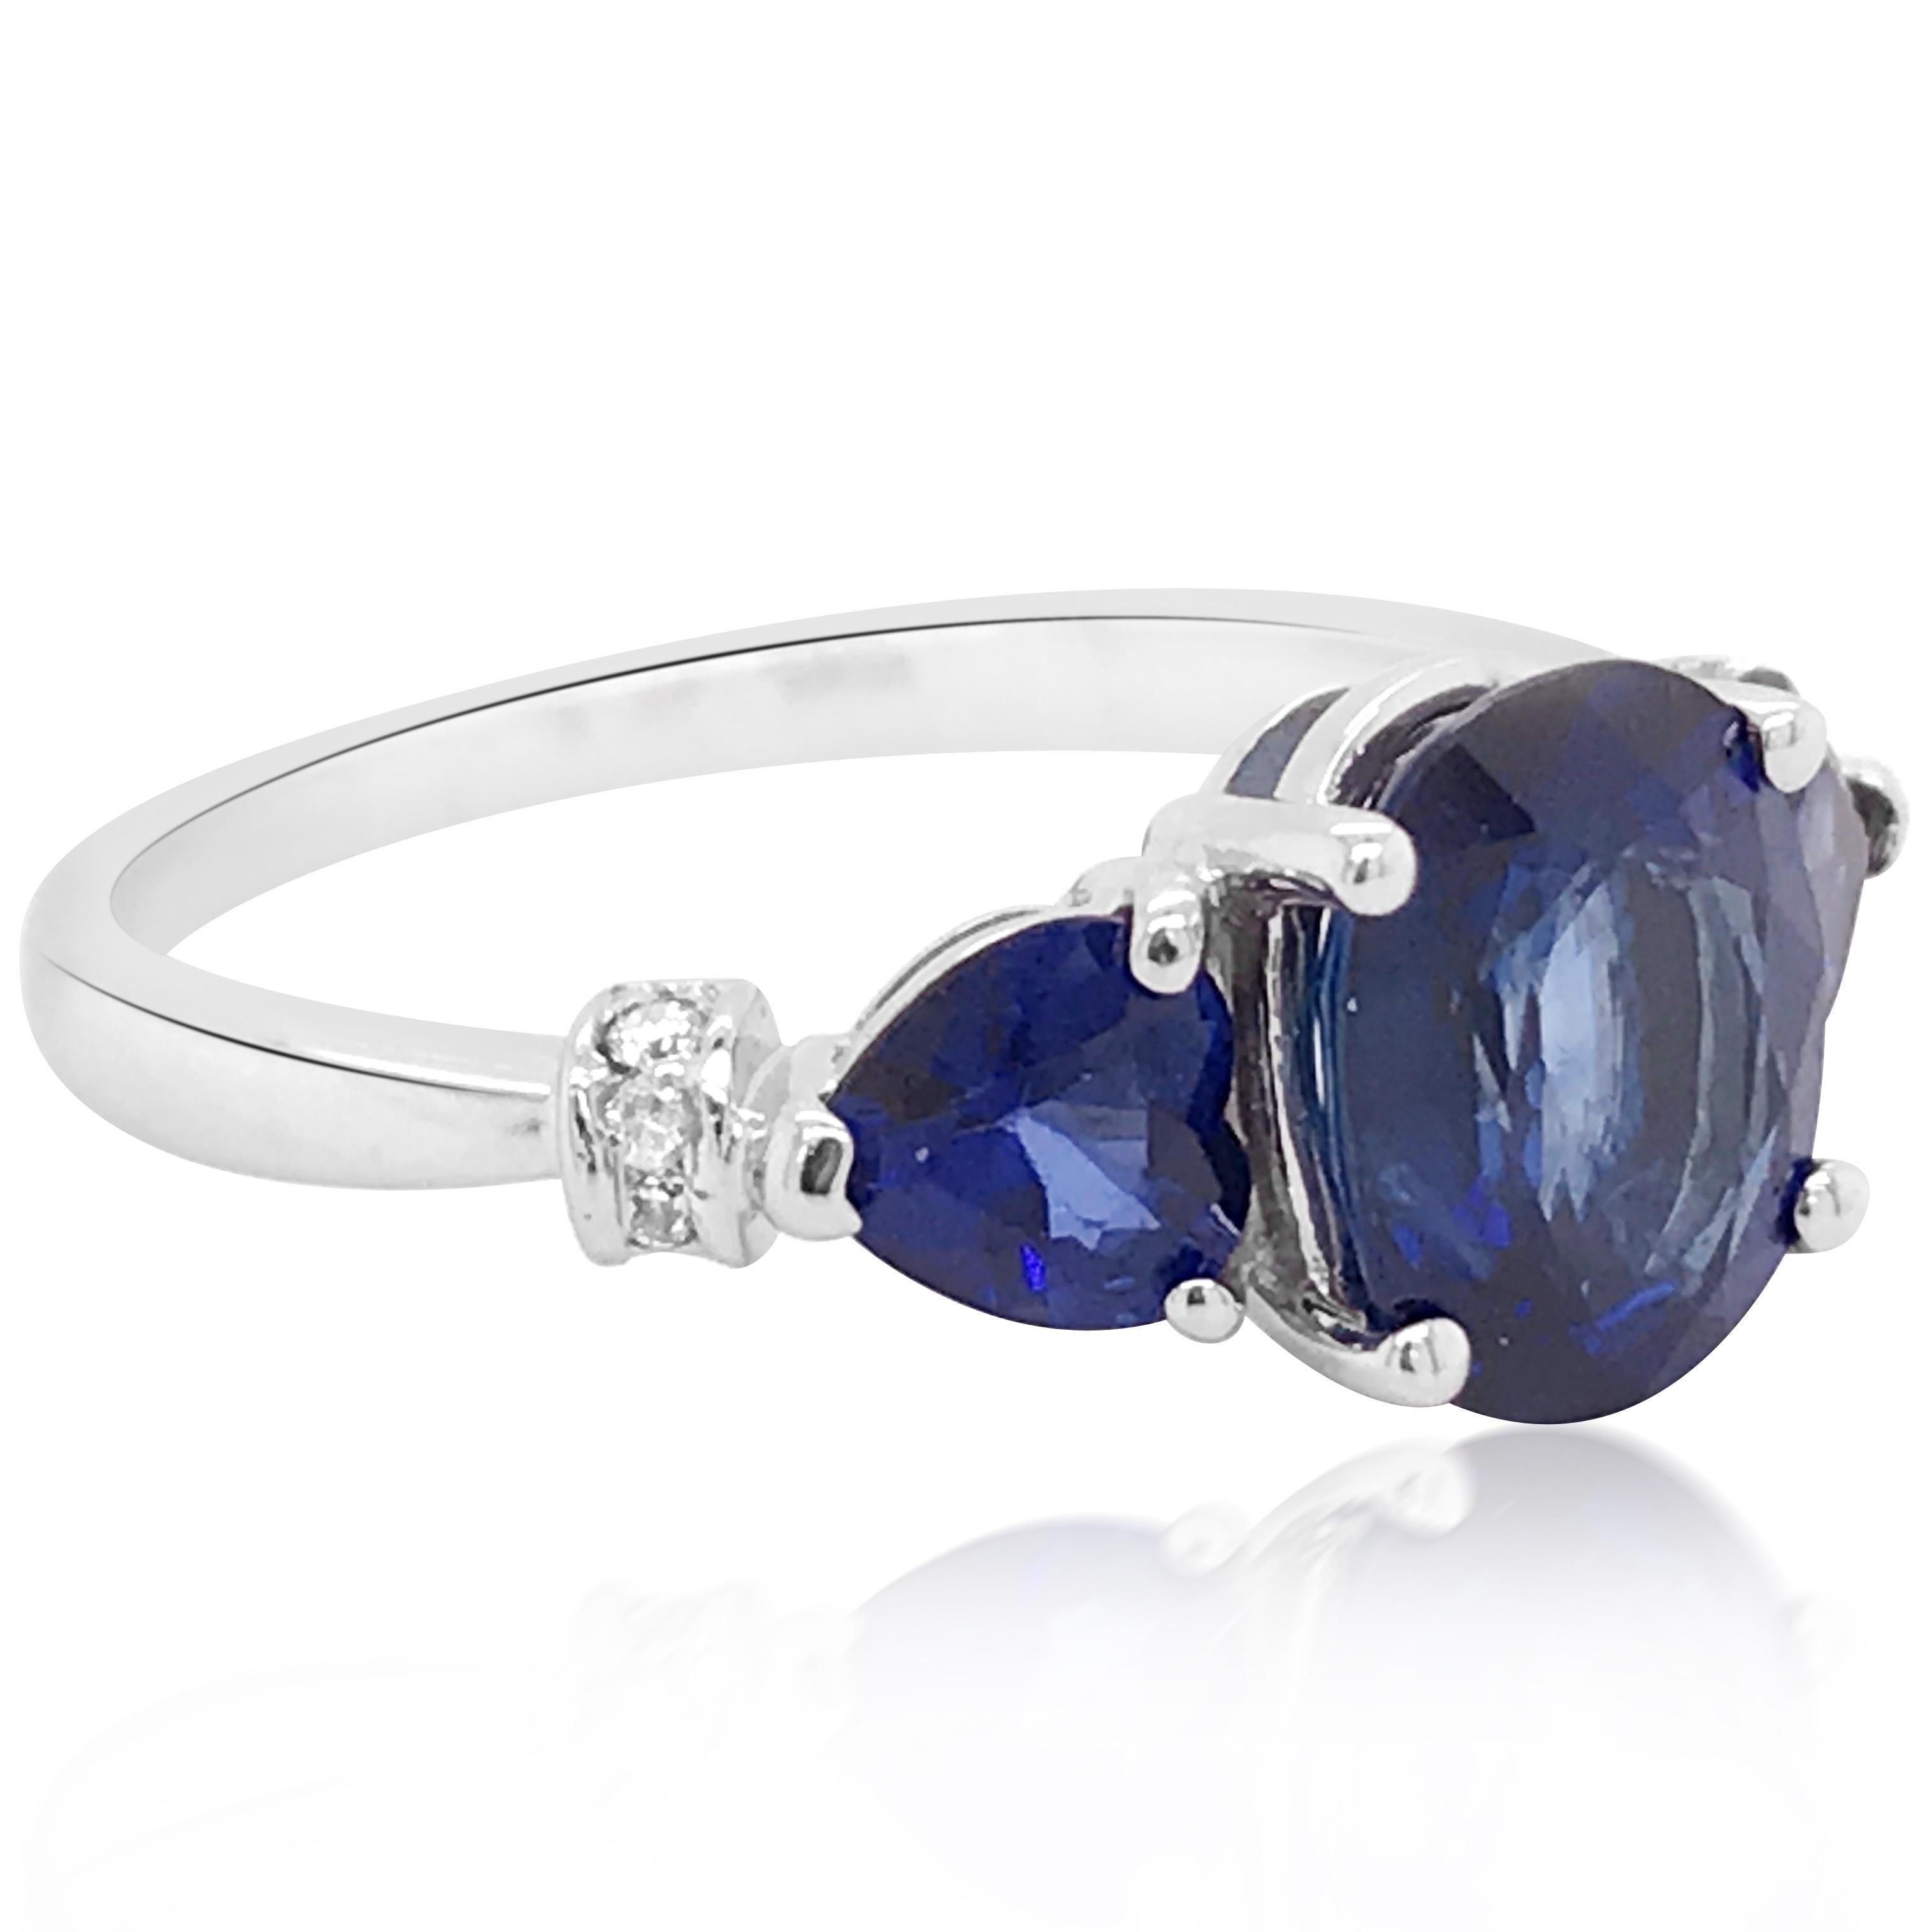 Sapphire total approx. 4.0ct.

Ring size: 6.5